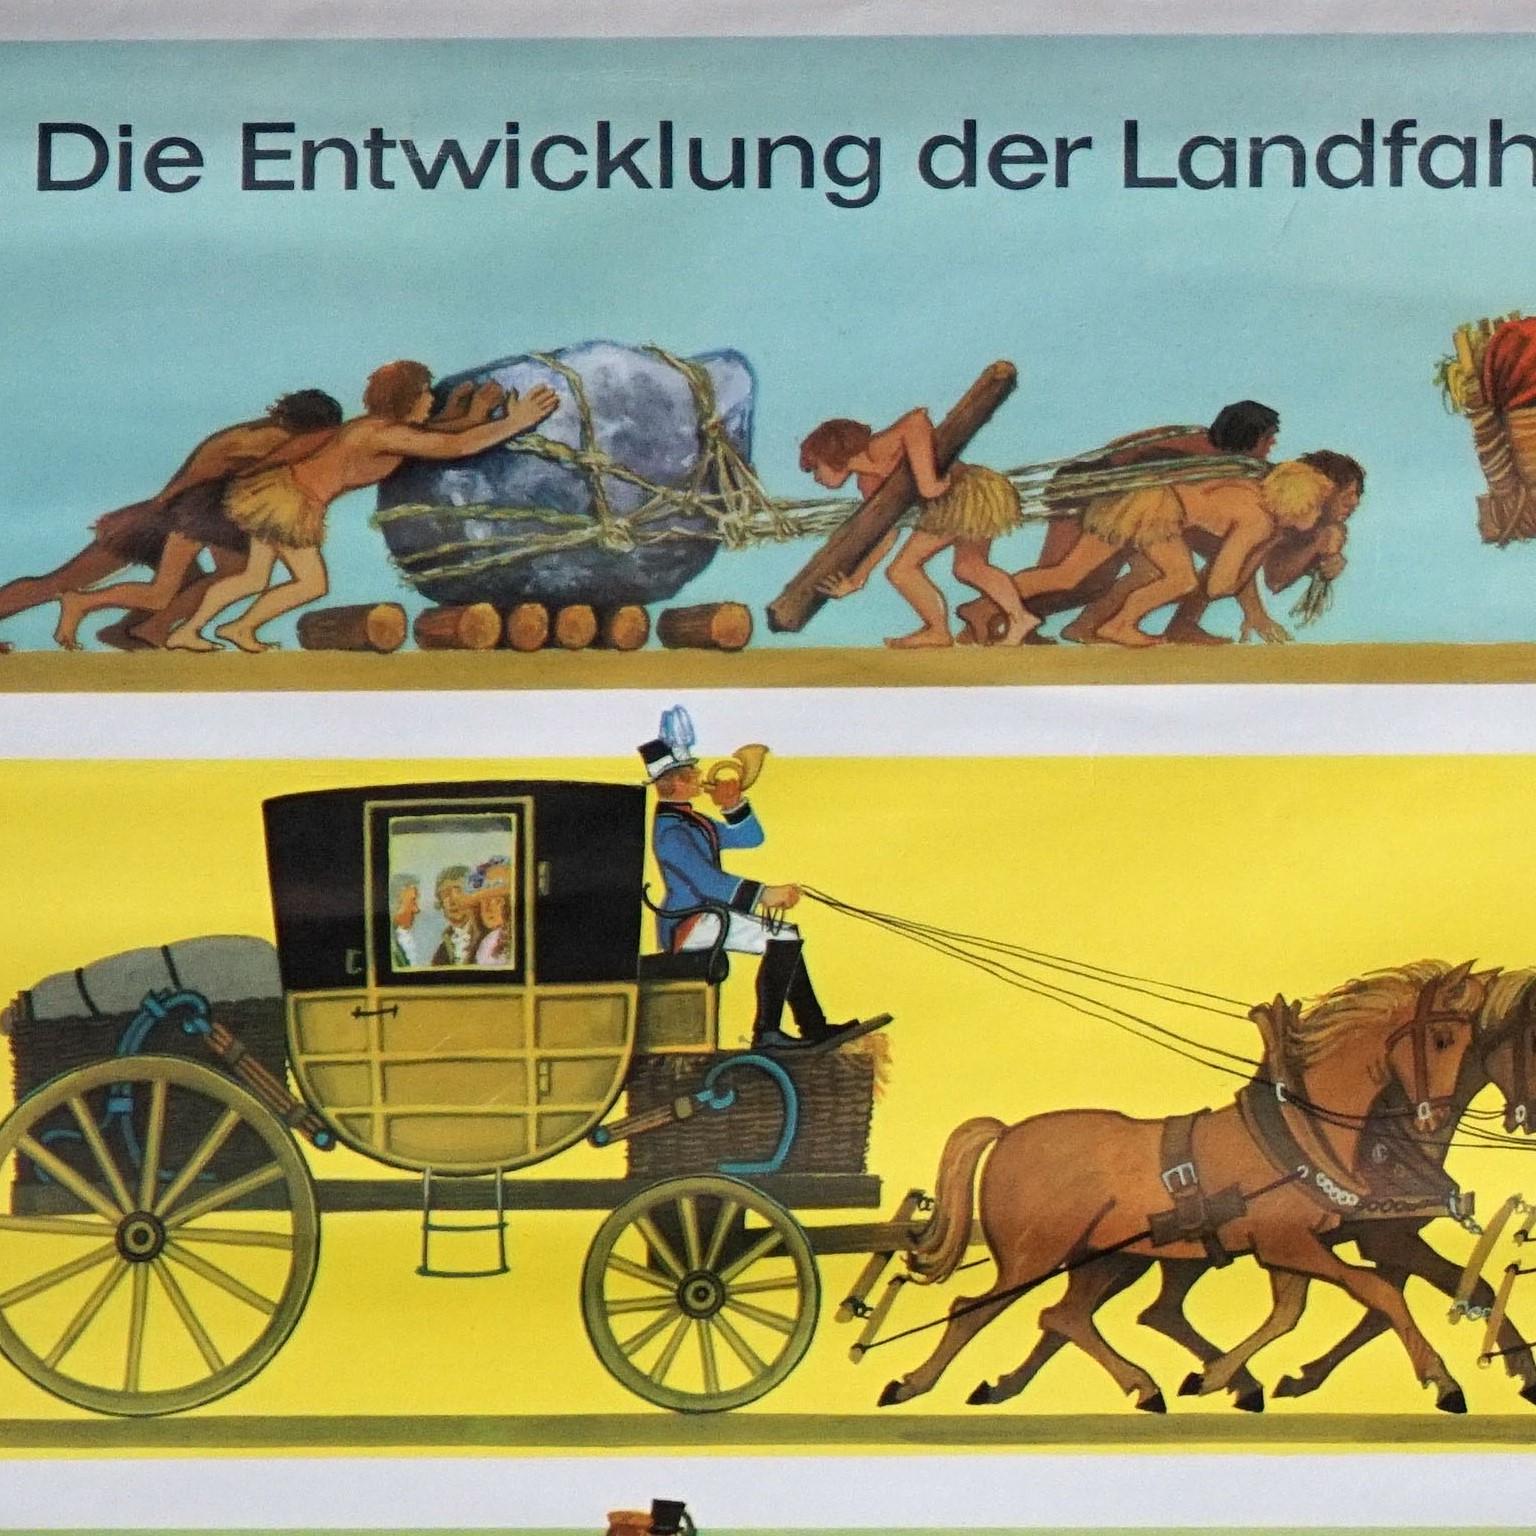 The vintage pull-down traffic wall chart shows a pictorial representation of the development of land vehicles from early cargo transportation, an ox cart with disc wheels, medieval covered wagons, stagecoach, trolley, horse-drawn streetcar,